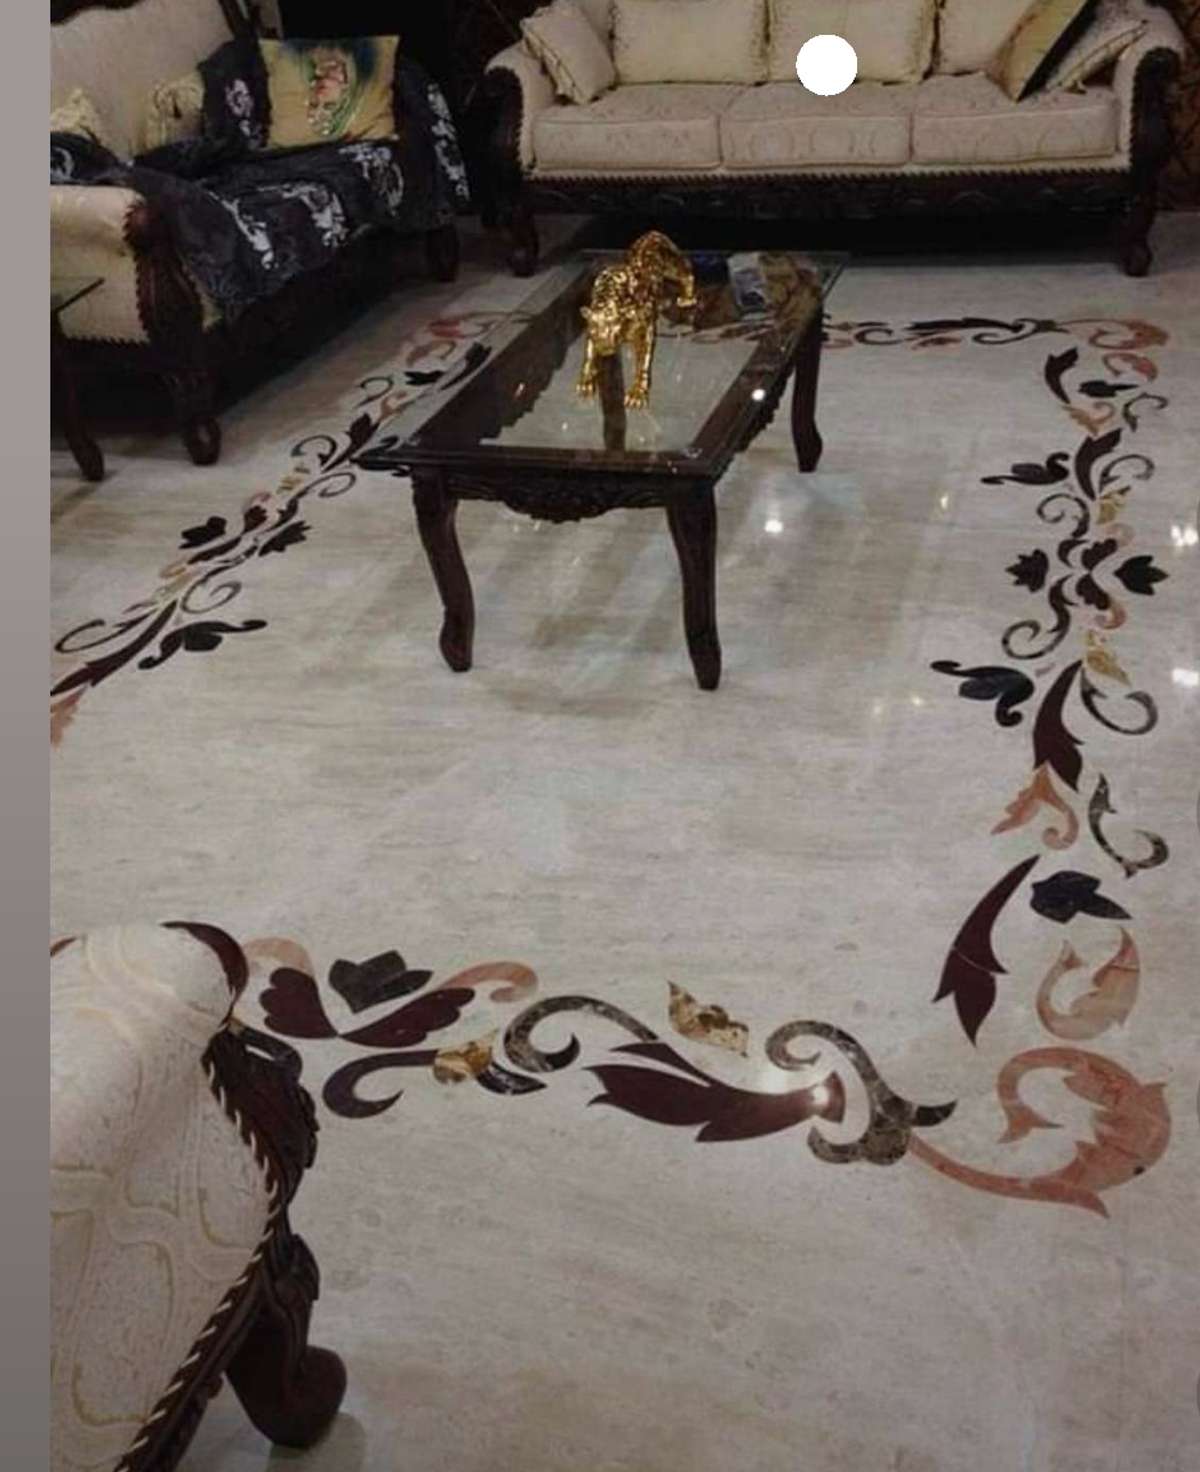 sir marble inlay work ki koi requirement ho to please contact kare.706038.8556